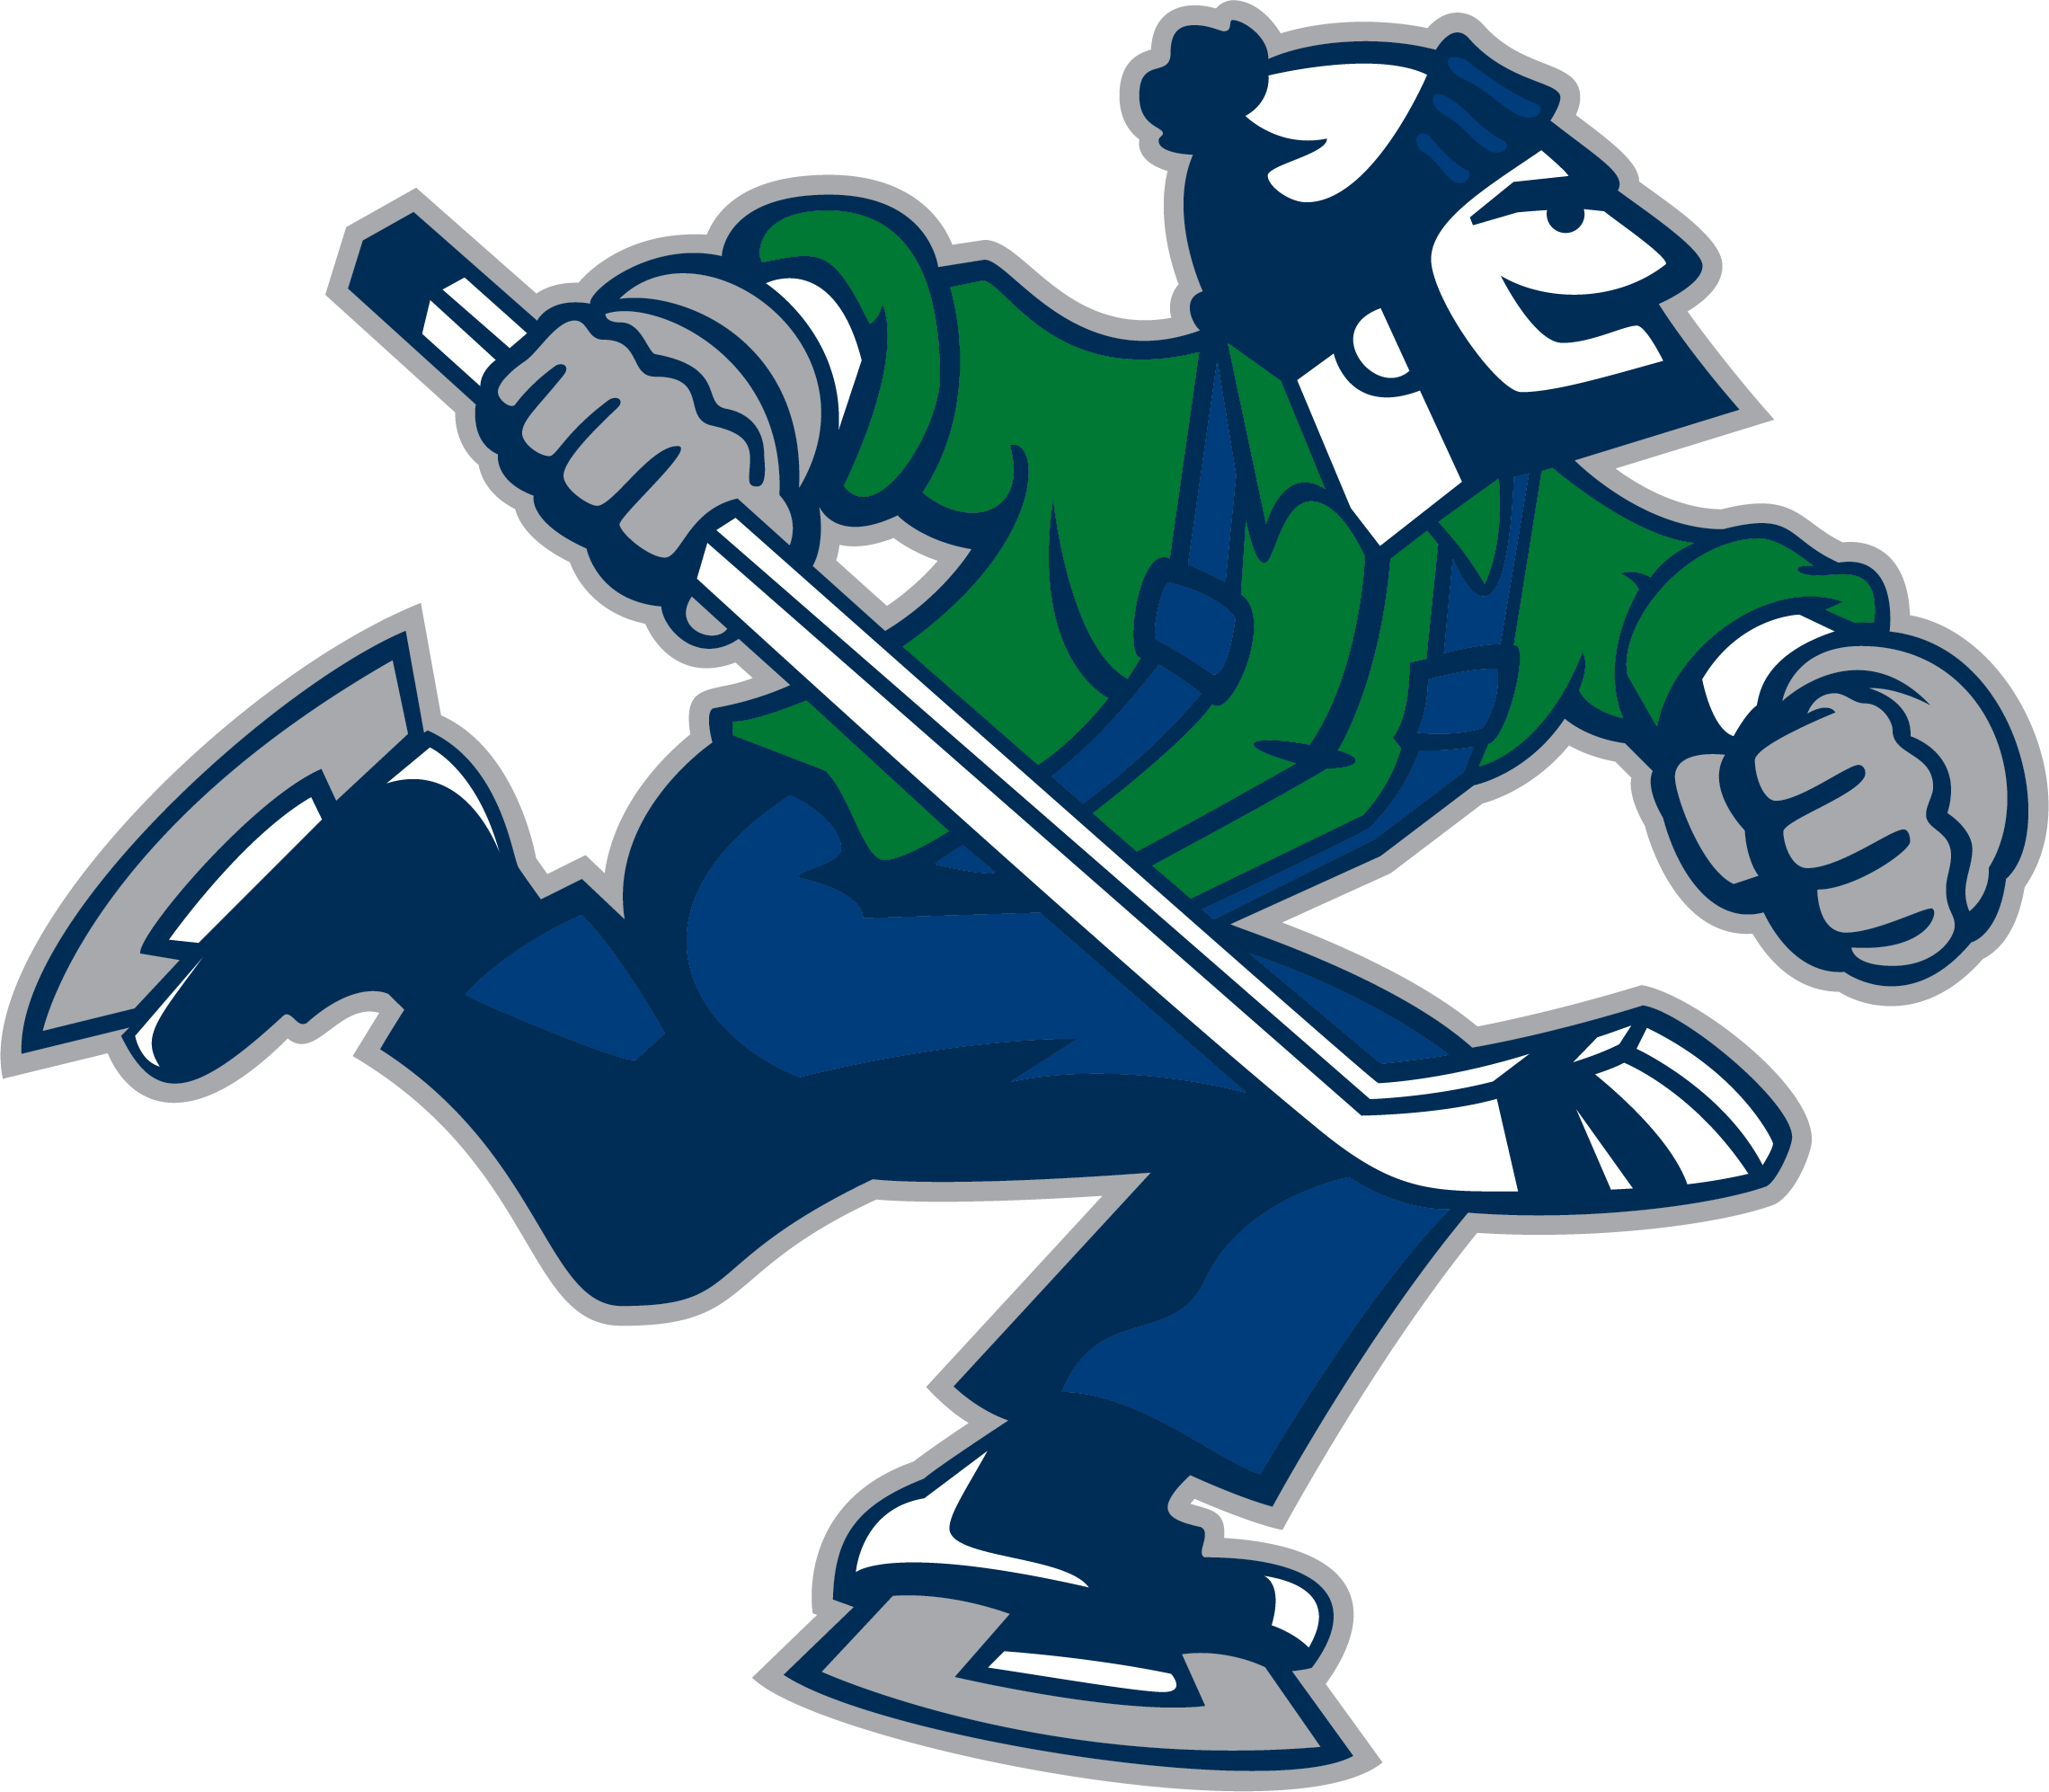 Abbotsford Canucks home jersey sold out online - The Abbotsford News